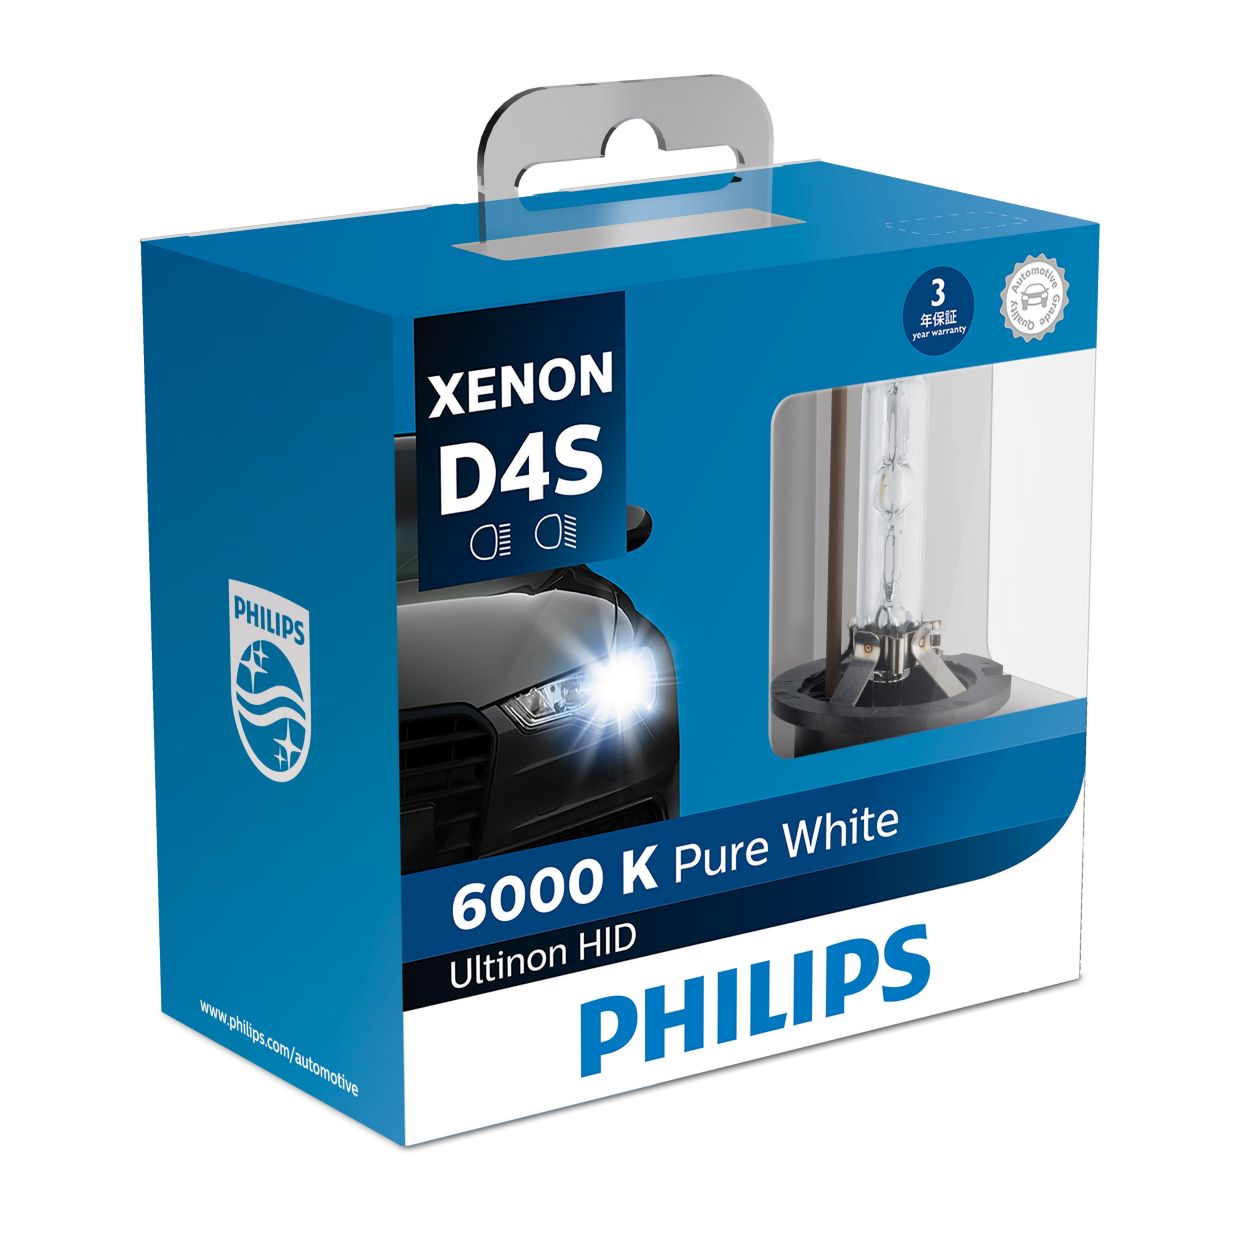 https://images.philips.com/is/image/philipsconsumer/dde9e07638544d1292feafab00f3ae7b?$jpglarge$&wid=1250